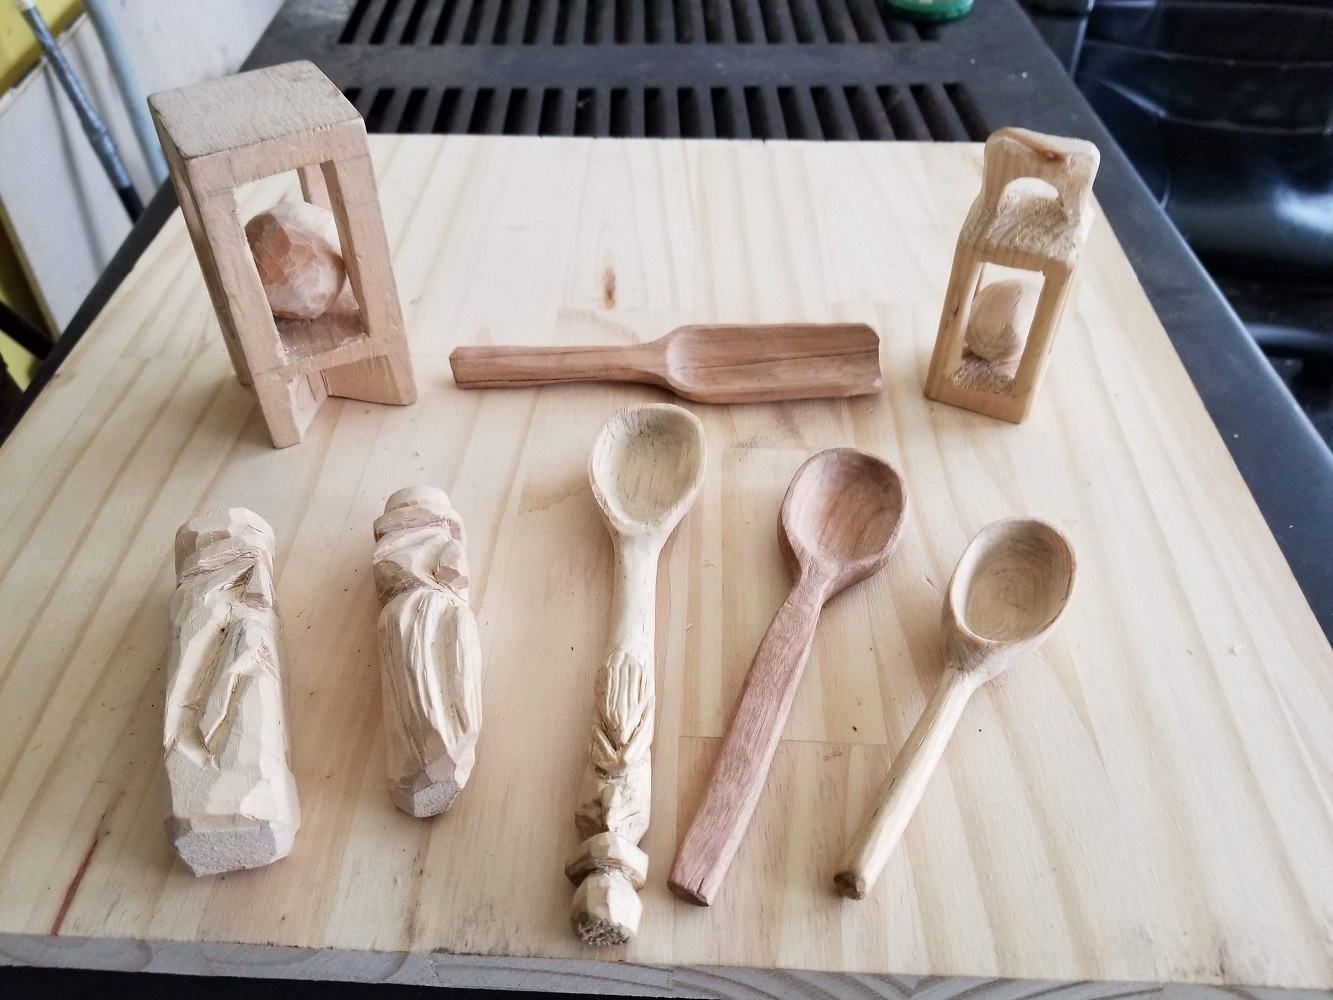 Carving Spoons - several examples on a wood table - Continuing Education at Seattle Central College 